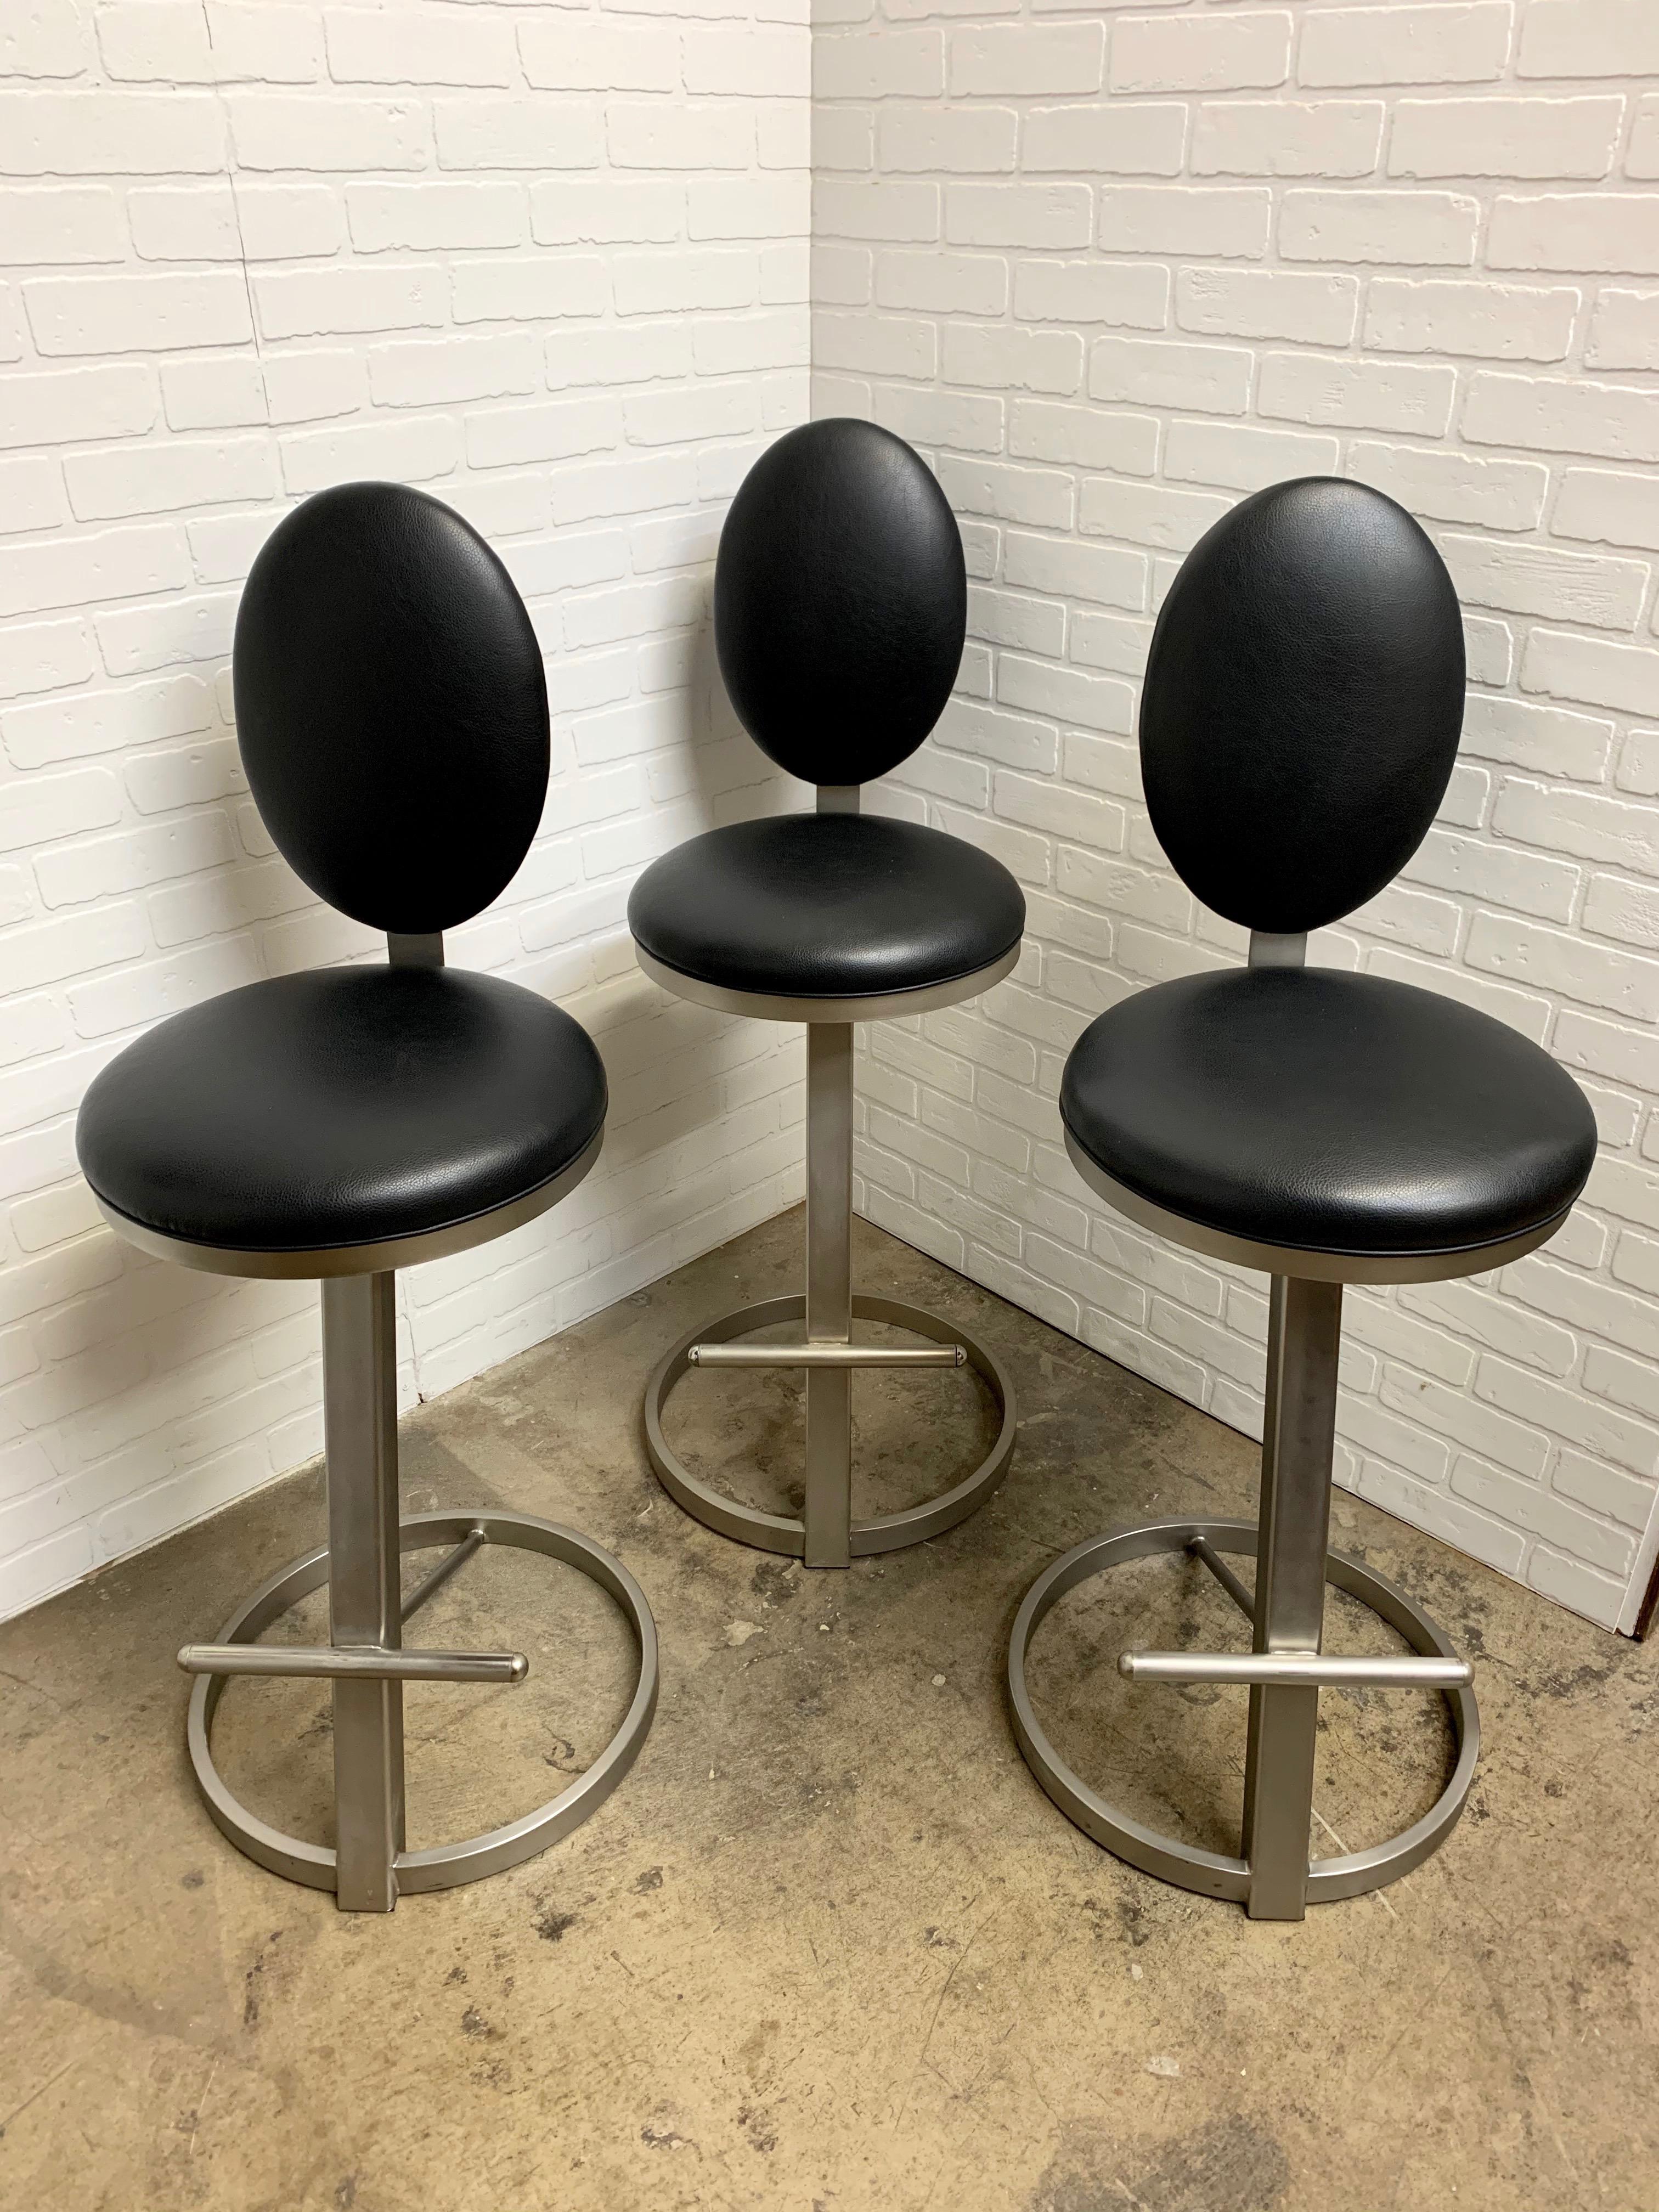 Silver steel with black textured vinyl seat and back in the postmodern design 
They have a swivel return so that they are always center for DIA.